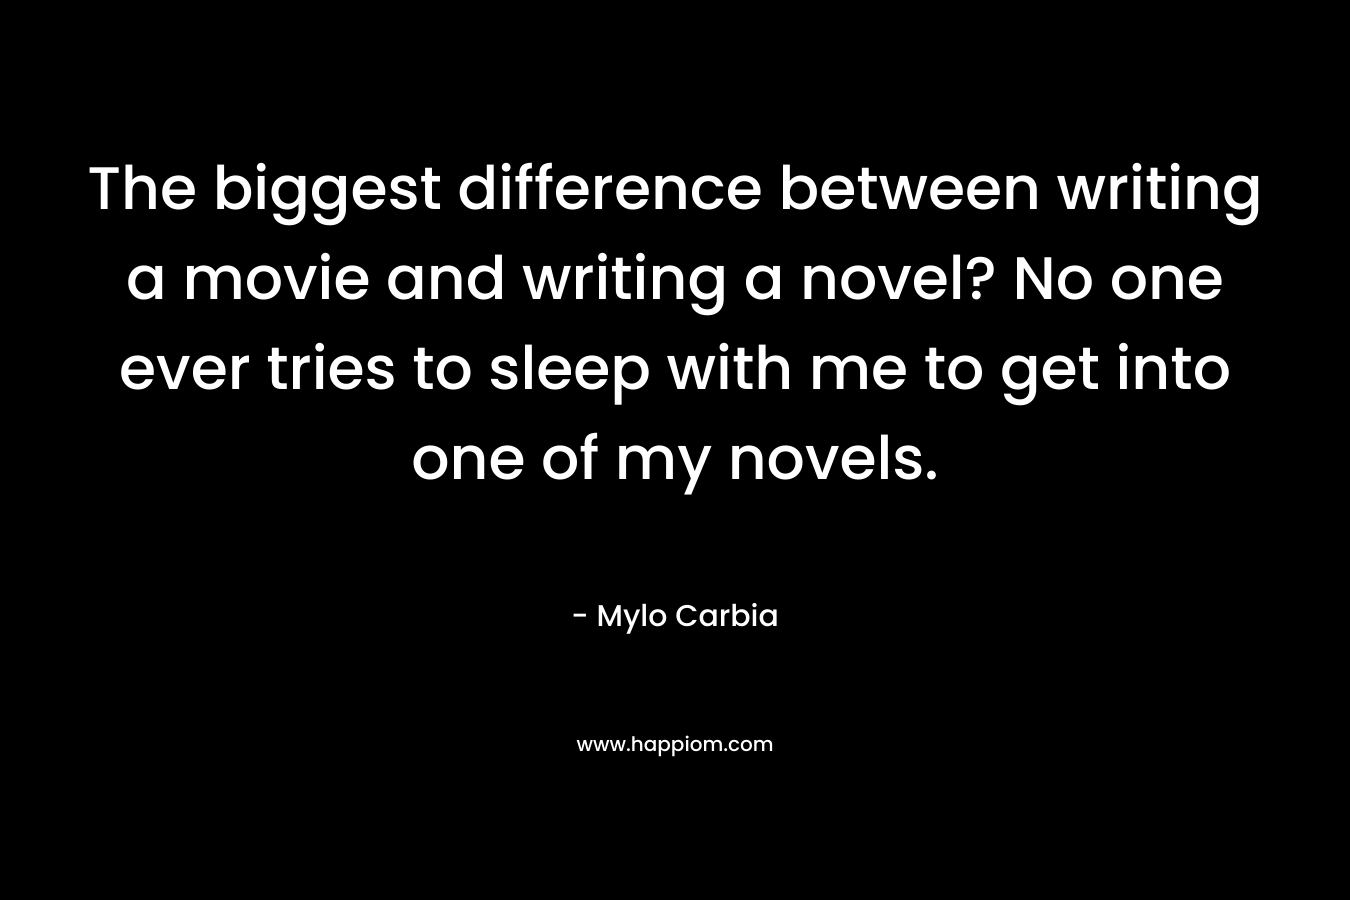 The biggest difference between writing a movie and writing a novel? No one ever tries to sleep with me to get into one of my novels.